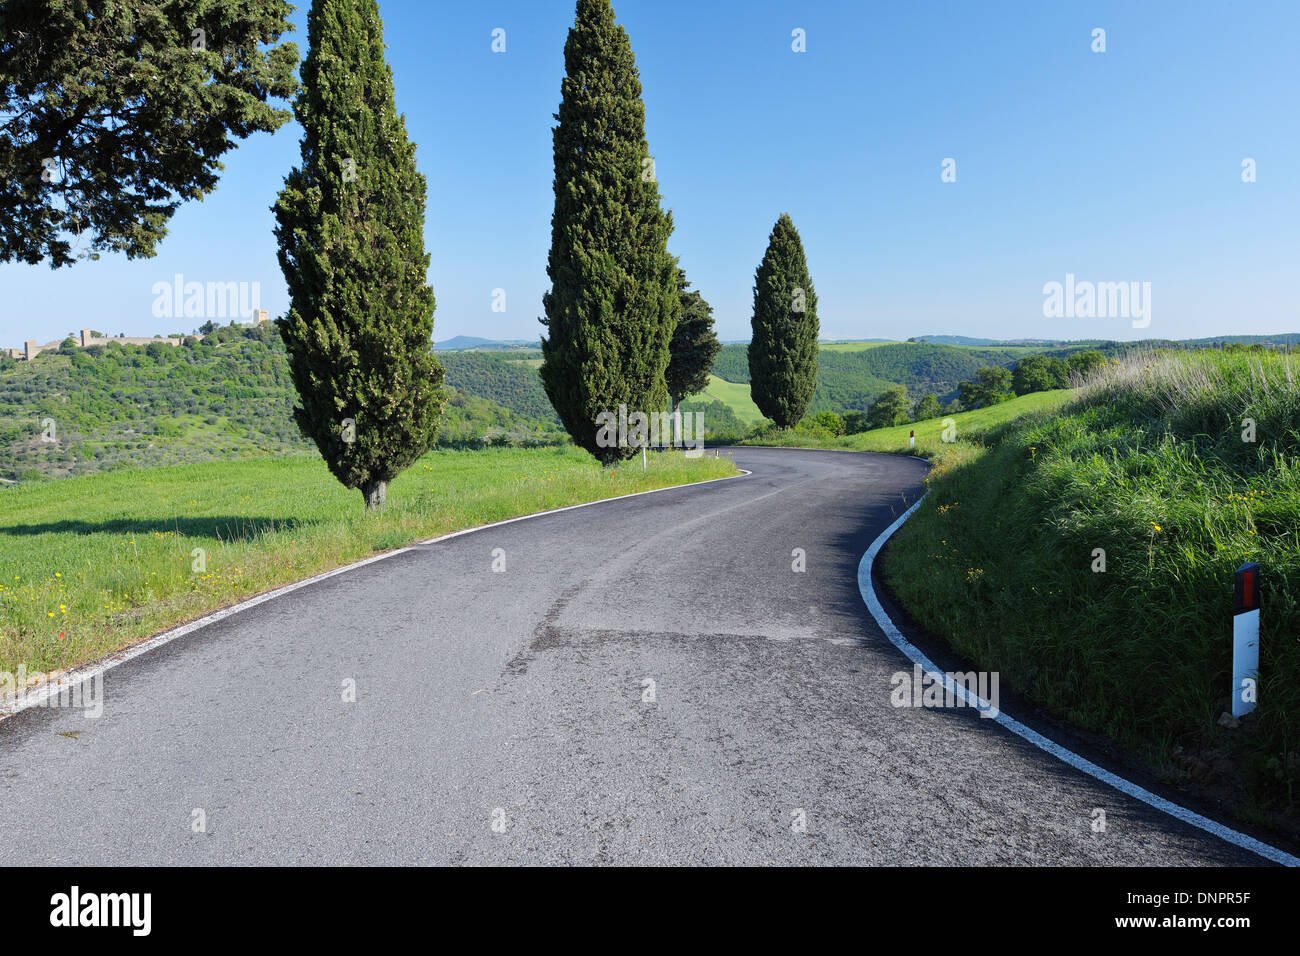 Rural Road lined with Cypress Trees (Cupressus sempervirens). Pienza, Siena district, Tuscany, Toscana, Italy. Stock Photo